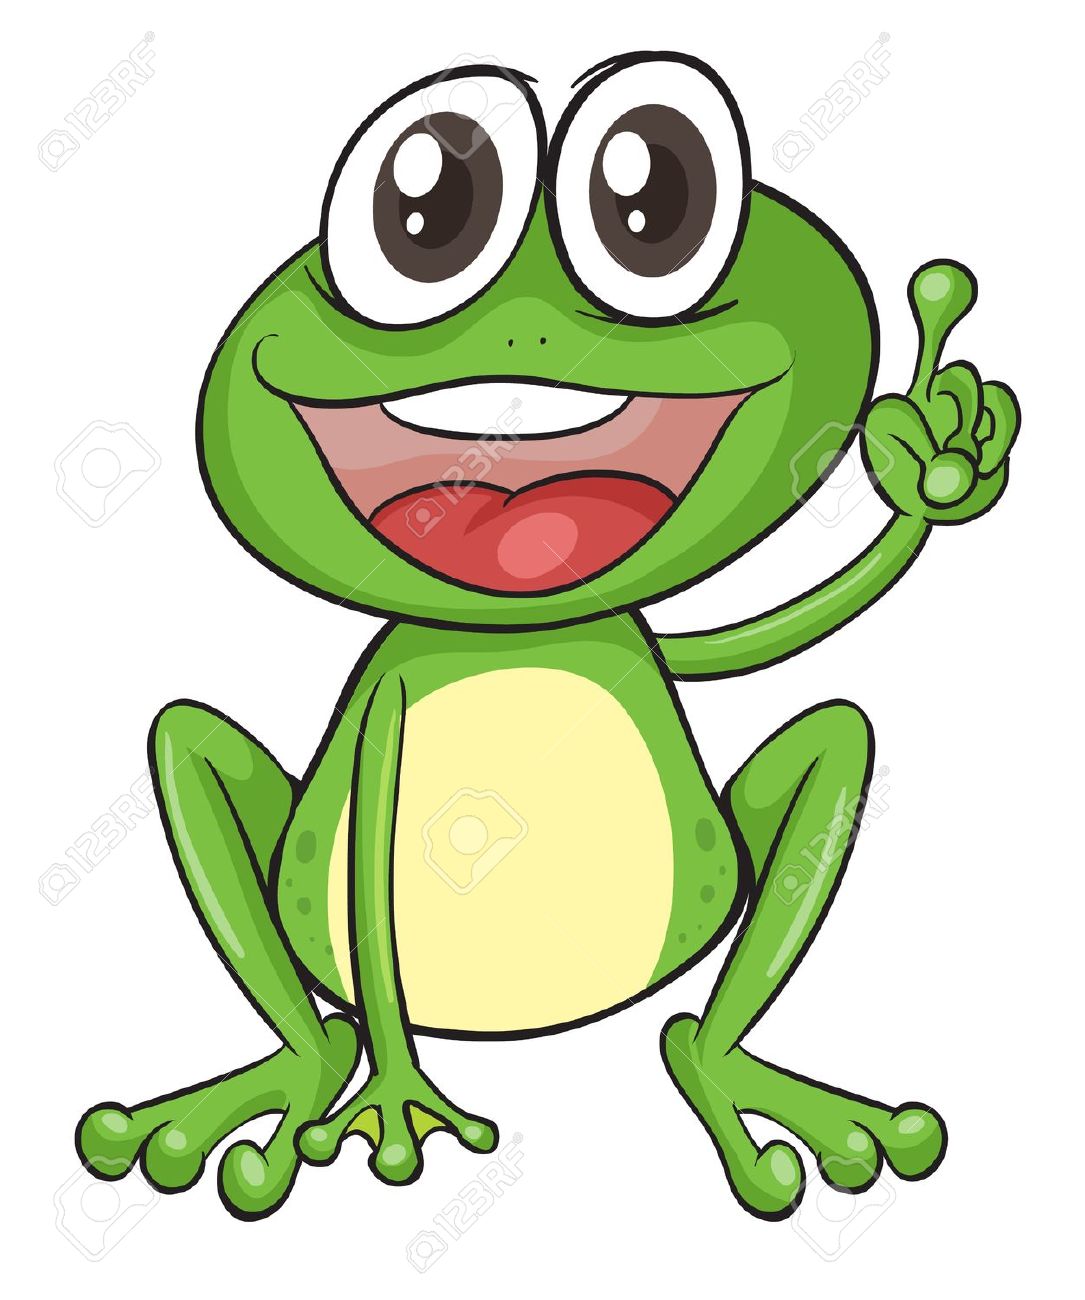 frog clipart free black and white - photo #45